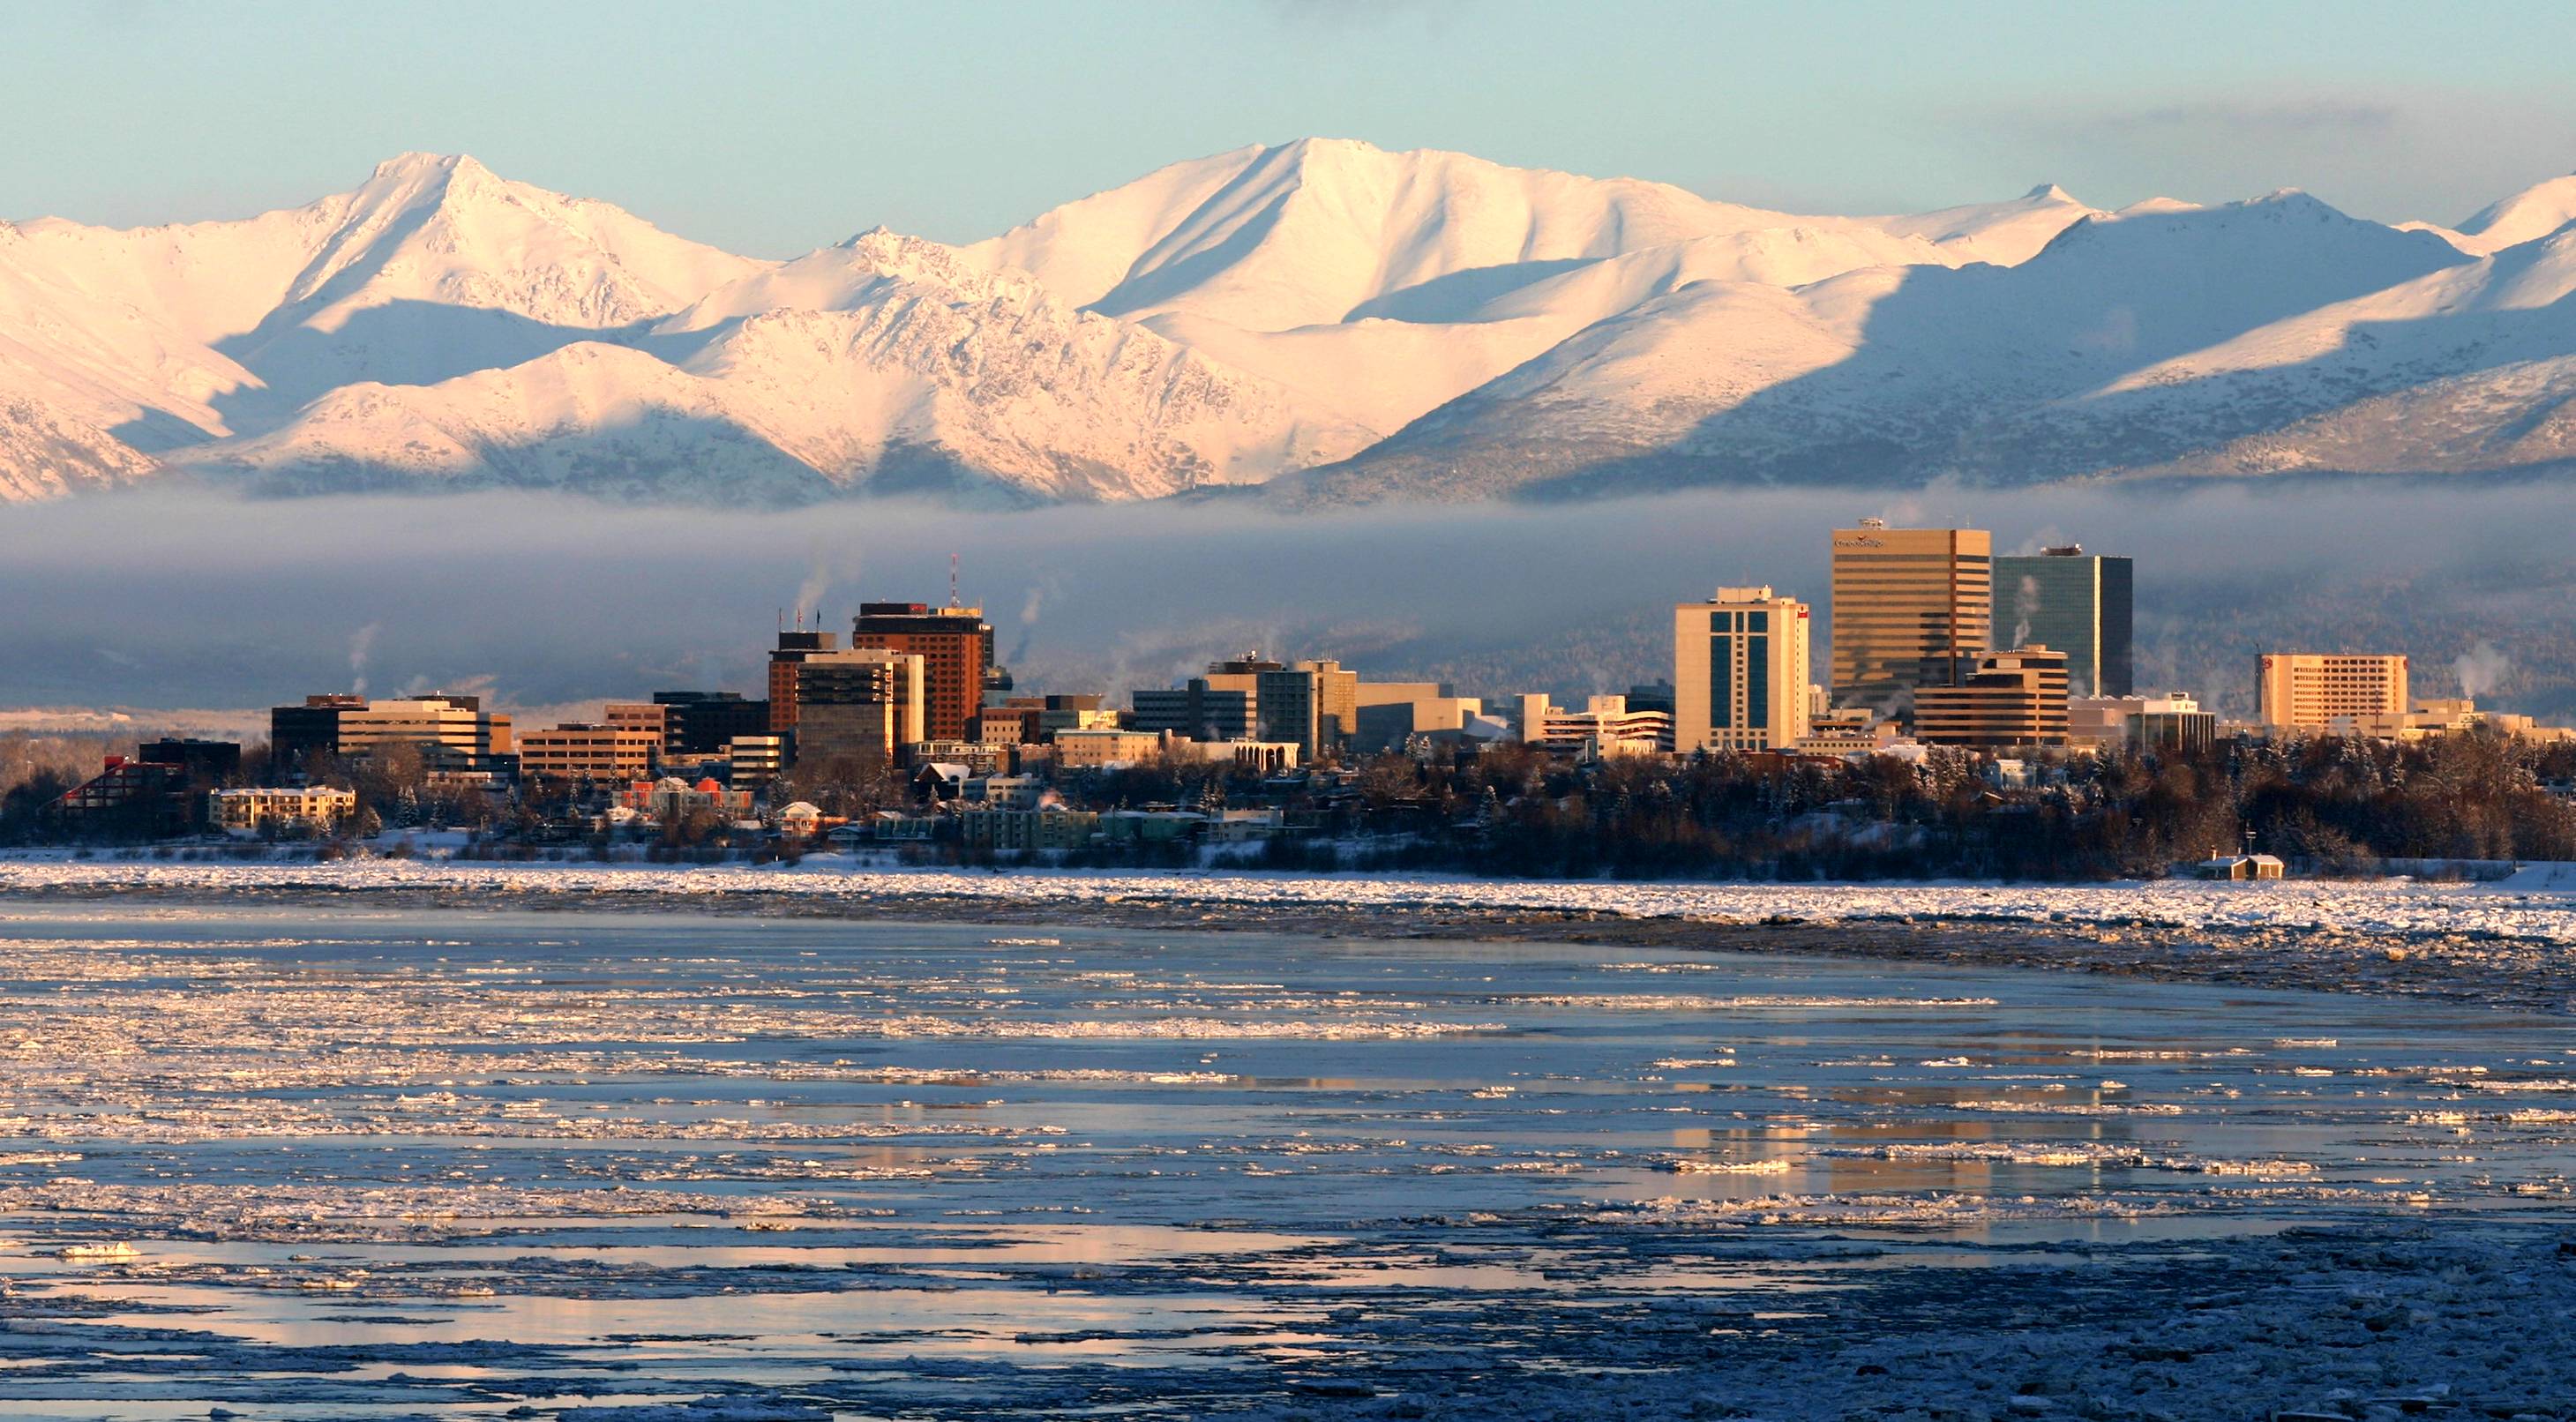 Anchorage may raise building height restrictions that would block precious winter sunlight. Building Design + Construction